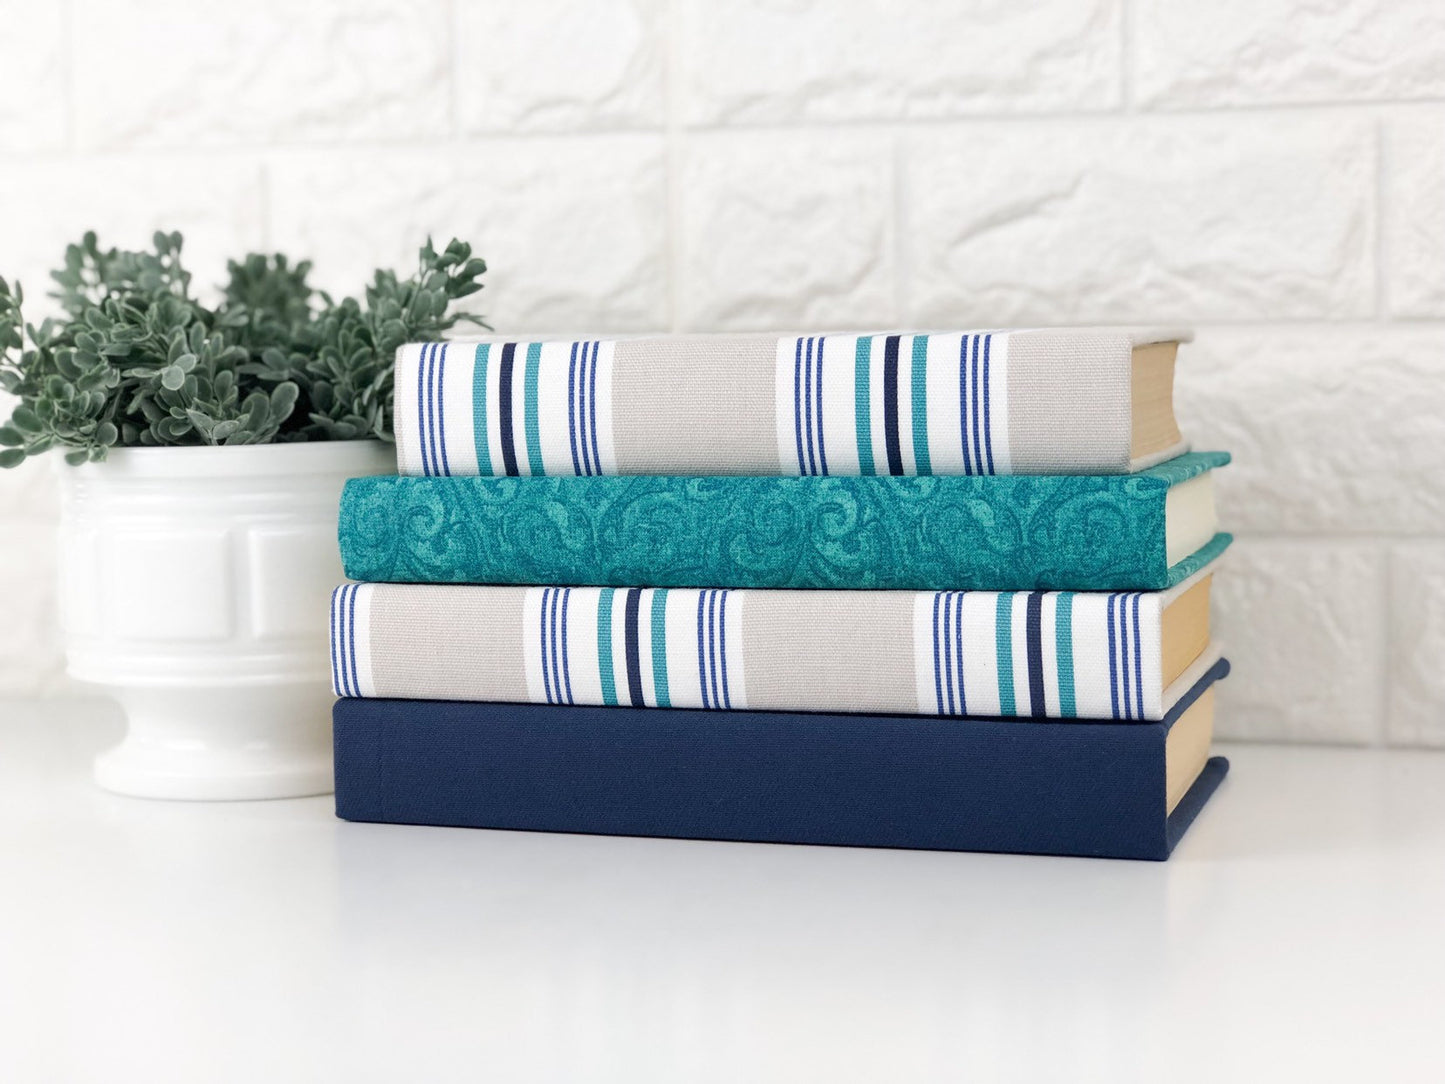 Turquoise Book Set of Home Decor